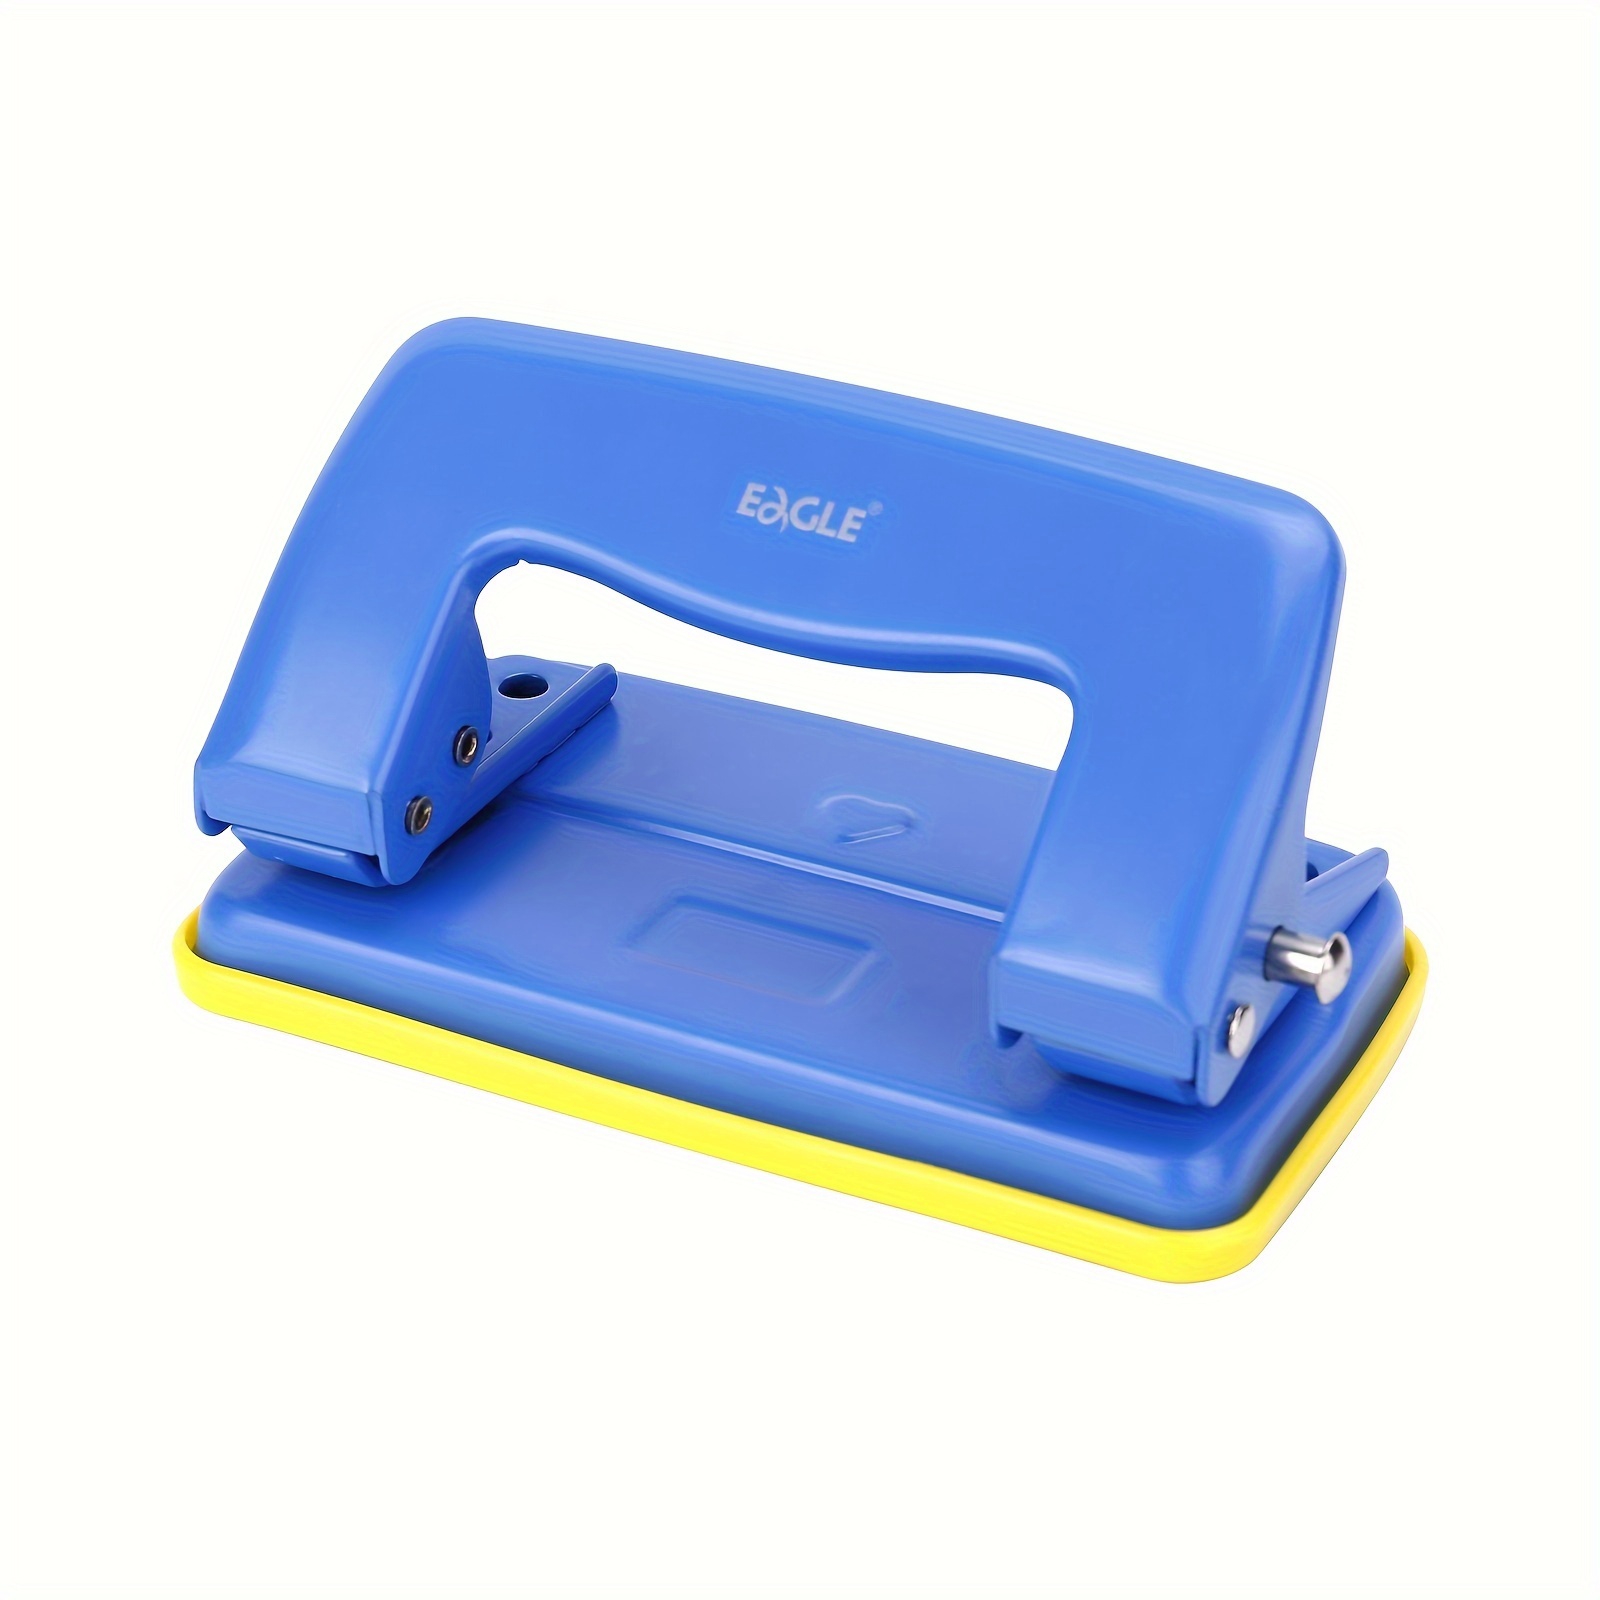 2 Hole Puncher, Two Hole Punch Desktop Hole Puncher Strong Paper Punch  Circle Handheld Hole Puncher for Home Office School Supplies, 70 Sheet